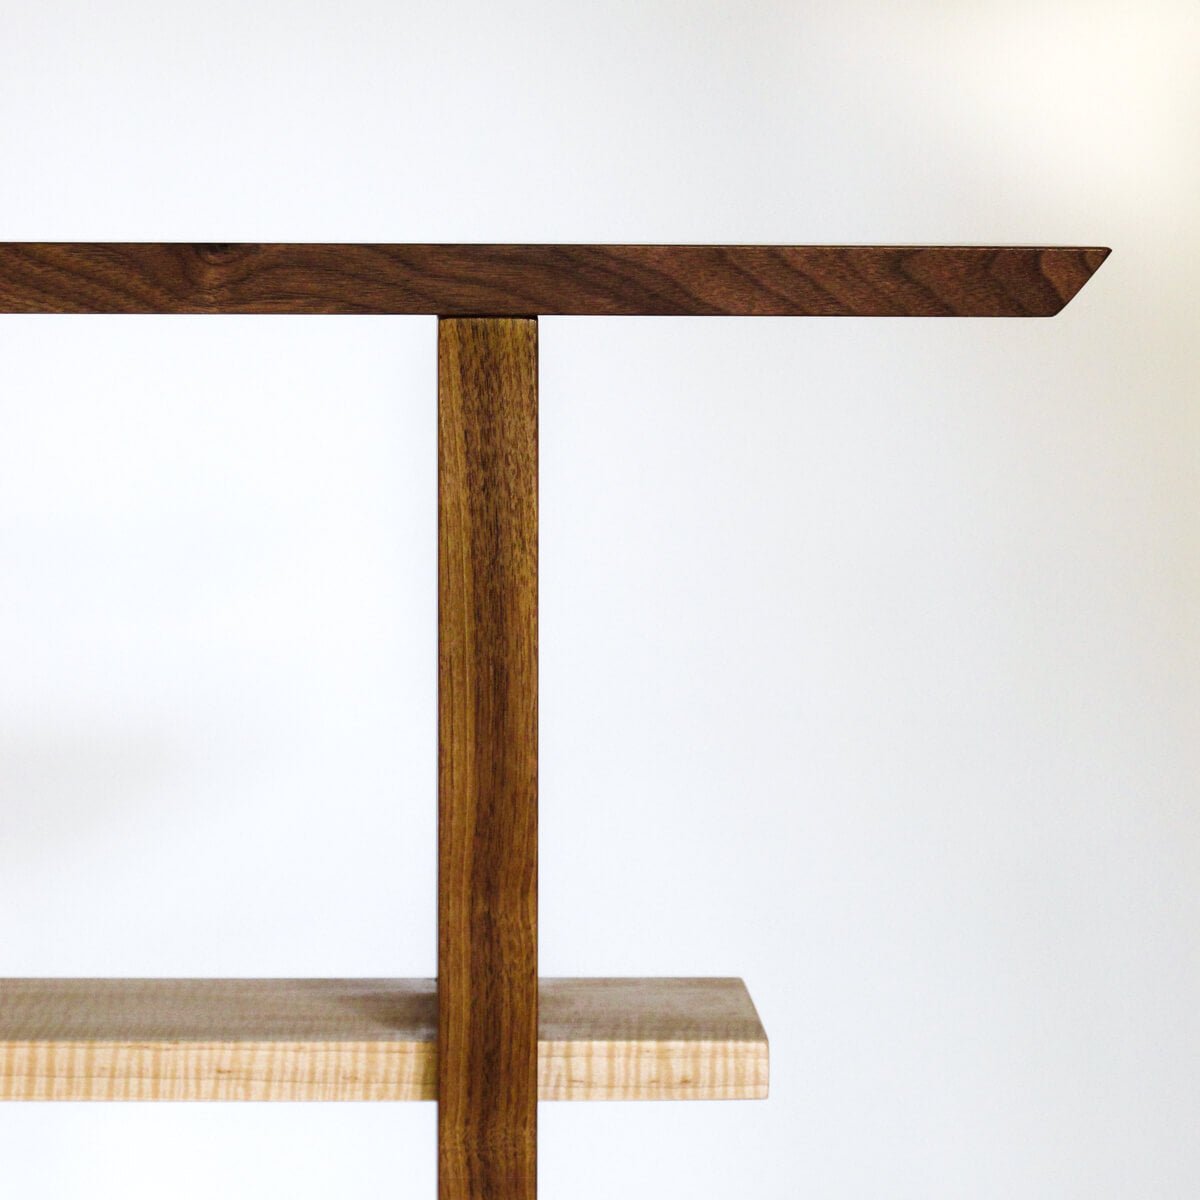 Designer Narrow Entry Table - minimalist console table for small entryways